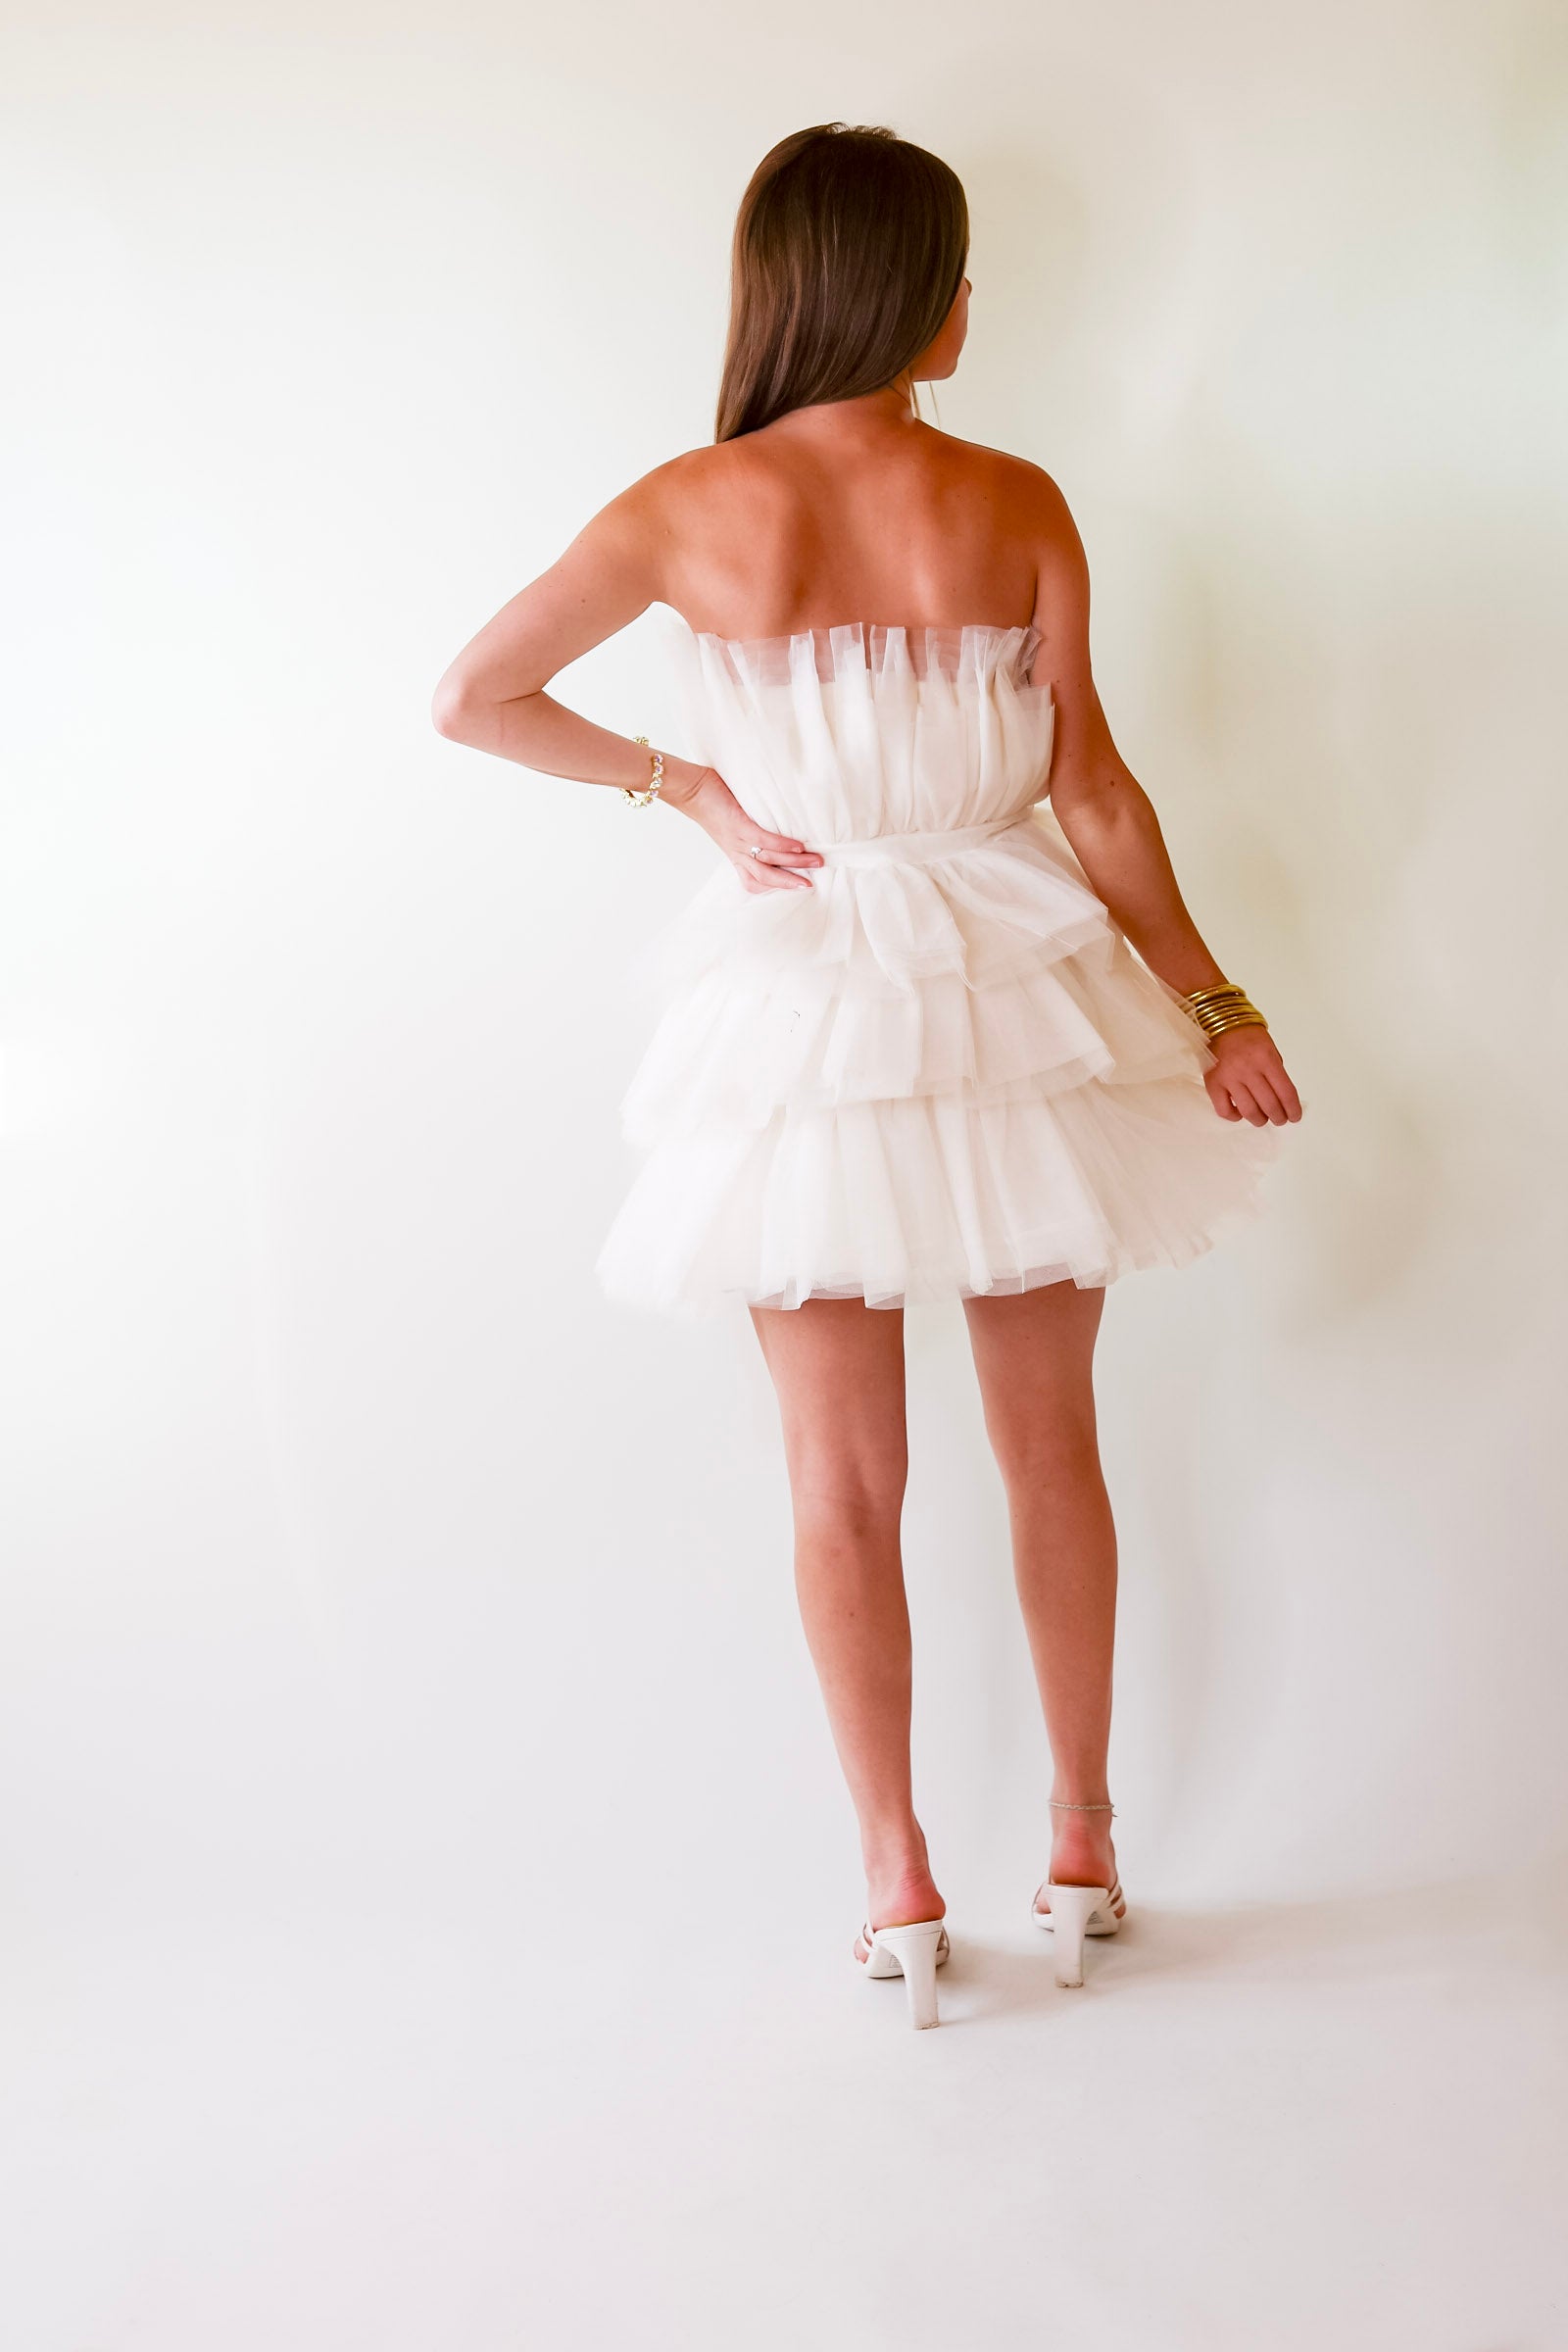 Lovestruck Babe Tulle Strapless Dress in Cream - Giddy Up Glamour Boutique